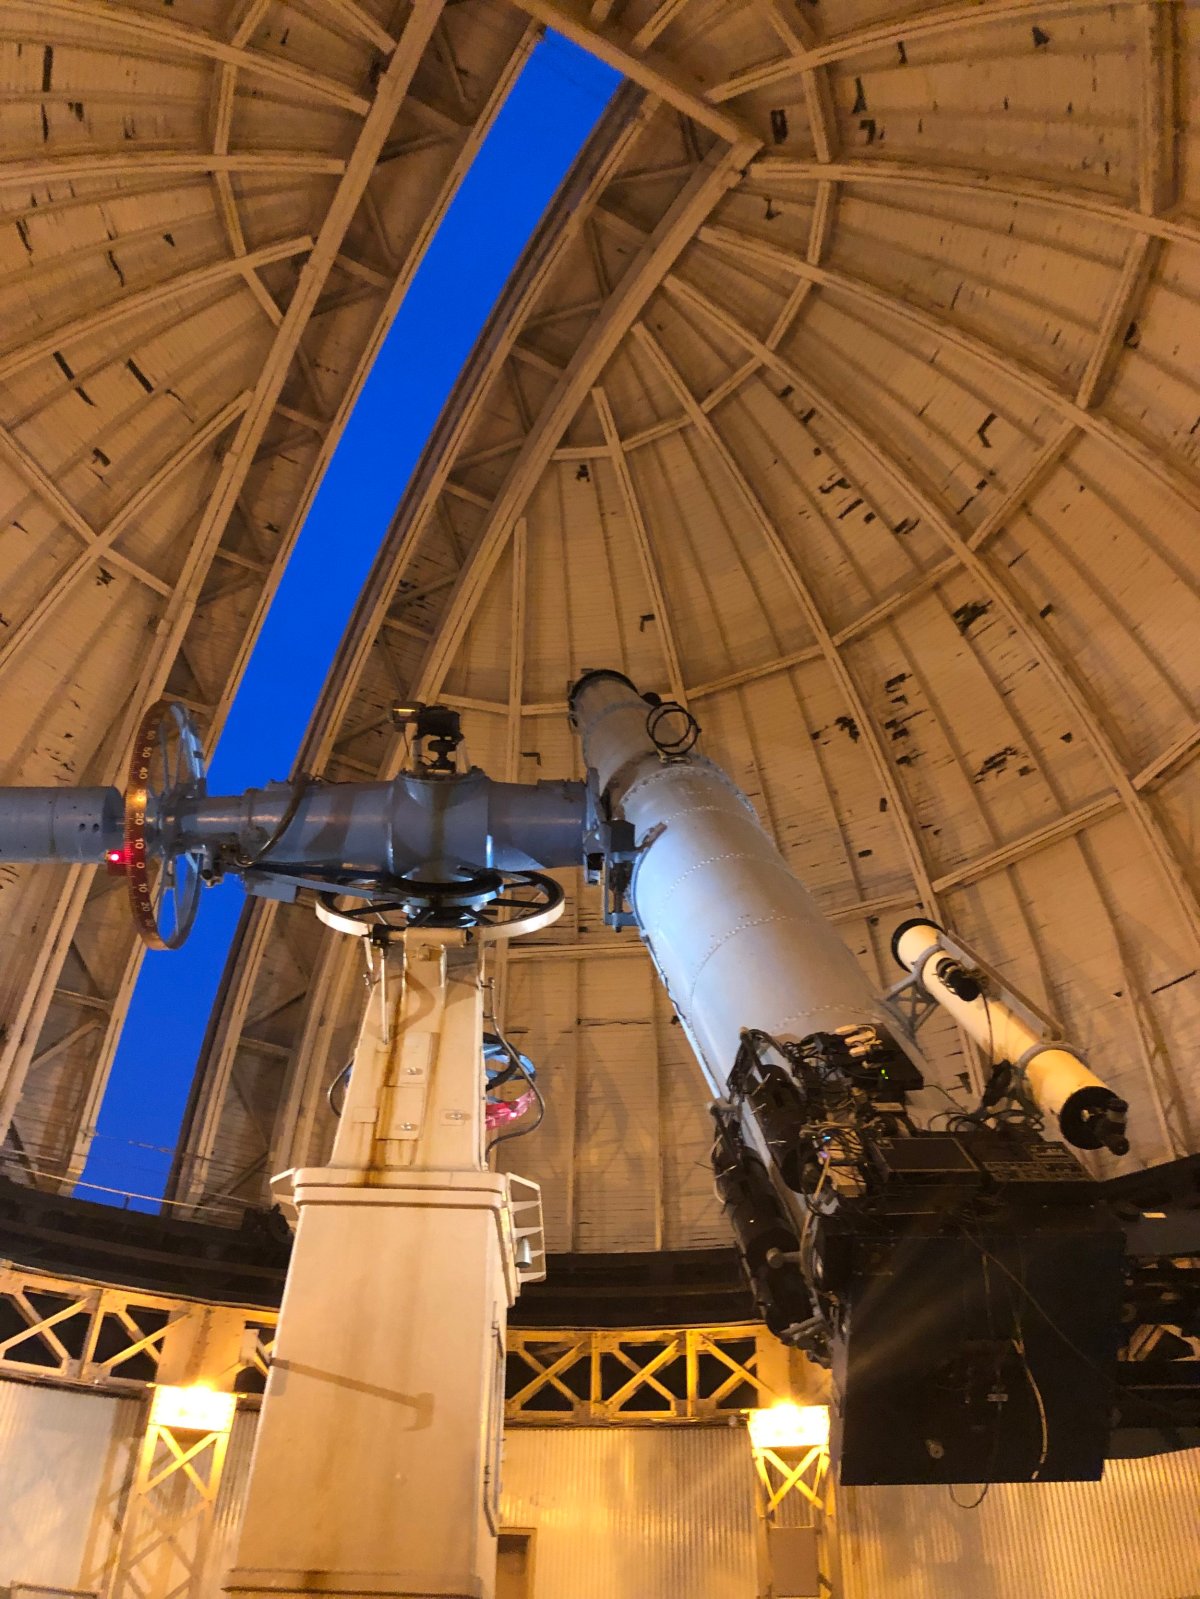 The Allegheny Observatory: How To Visit Another Planet (or two) Without Leaving the Burgh!